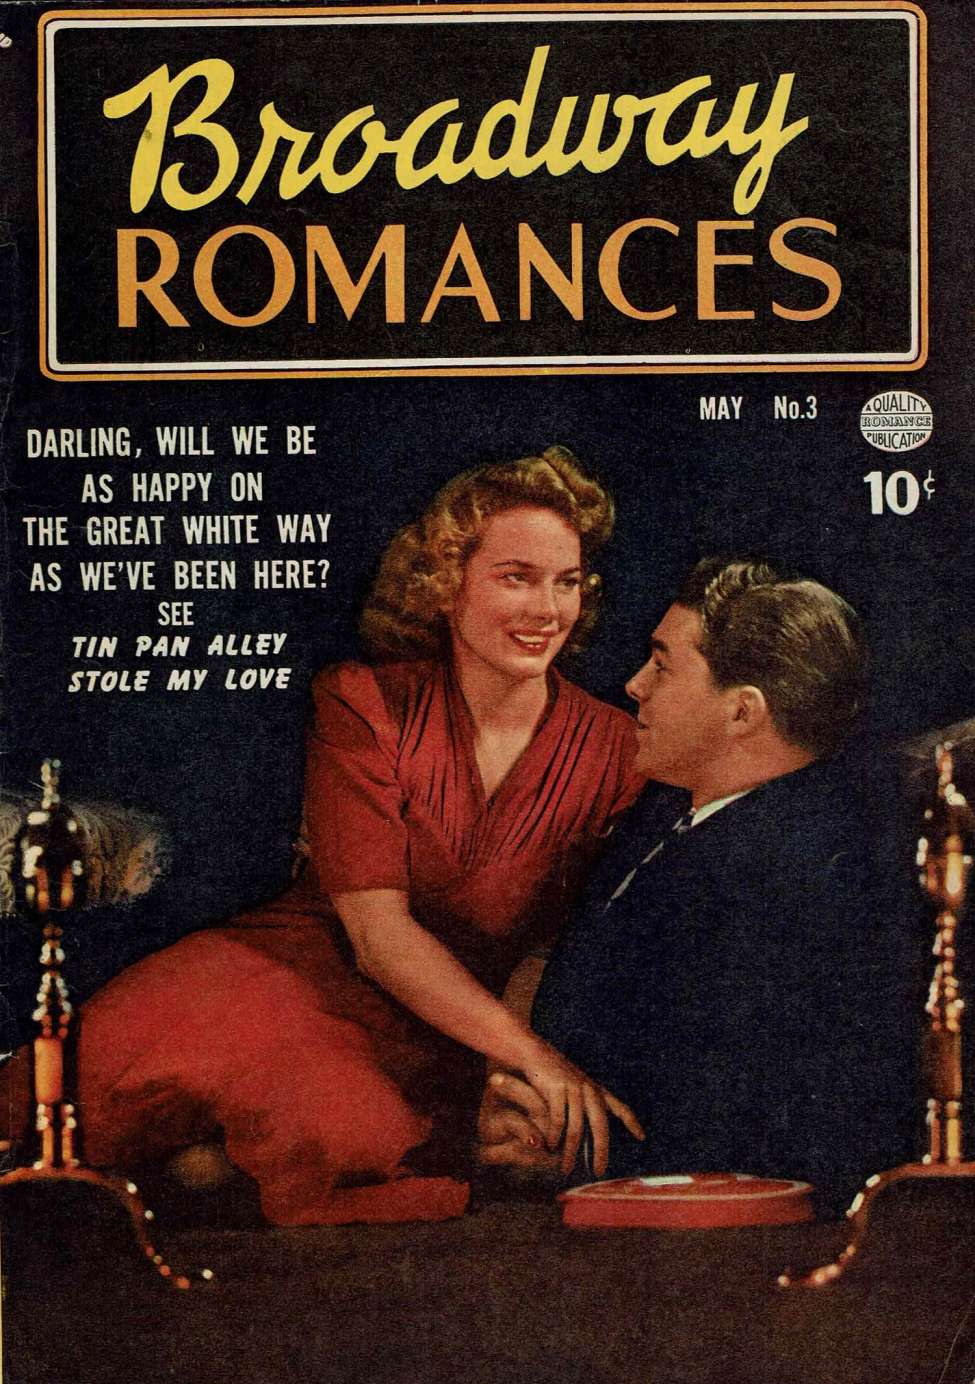 Comic Book Cover For Broadway Romances 3